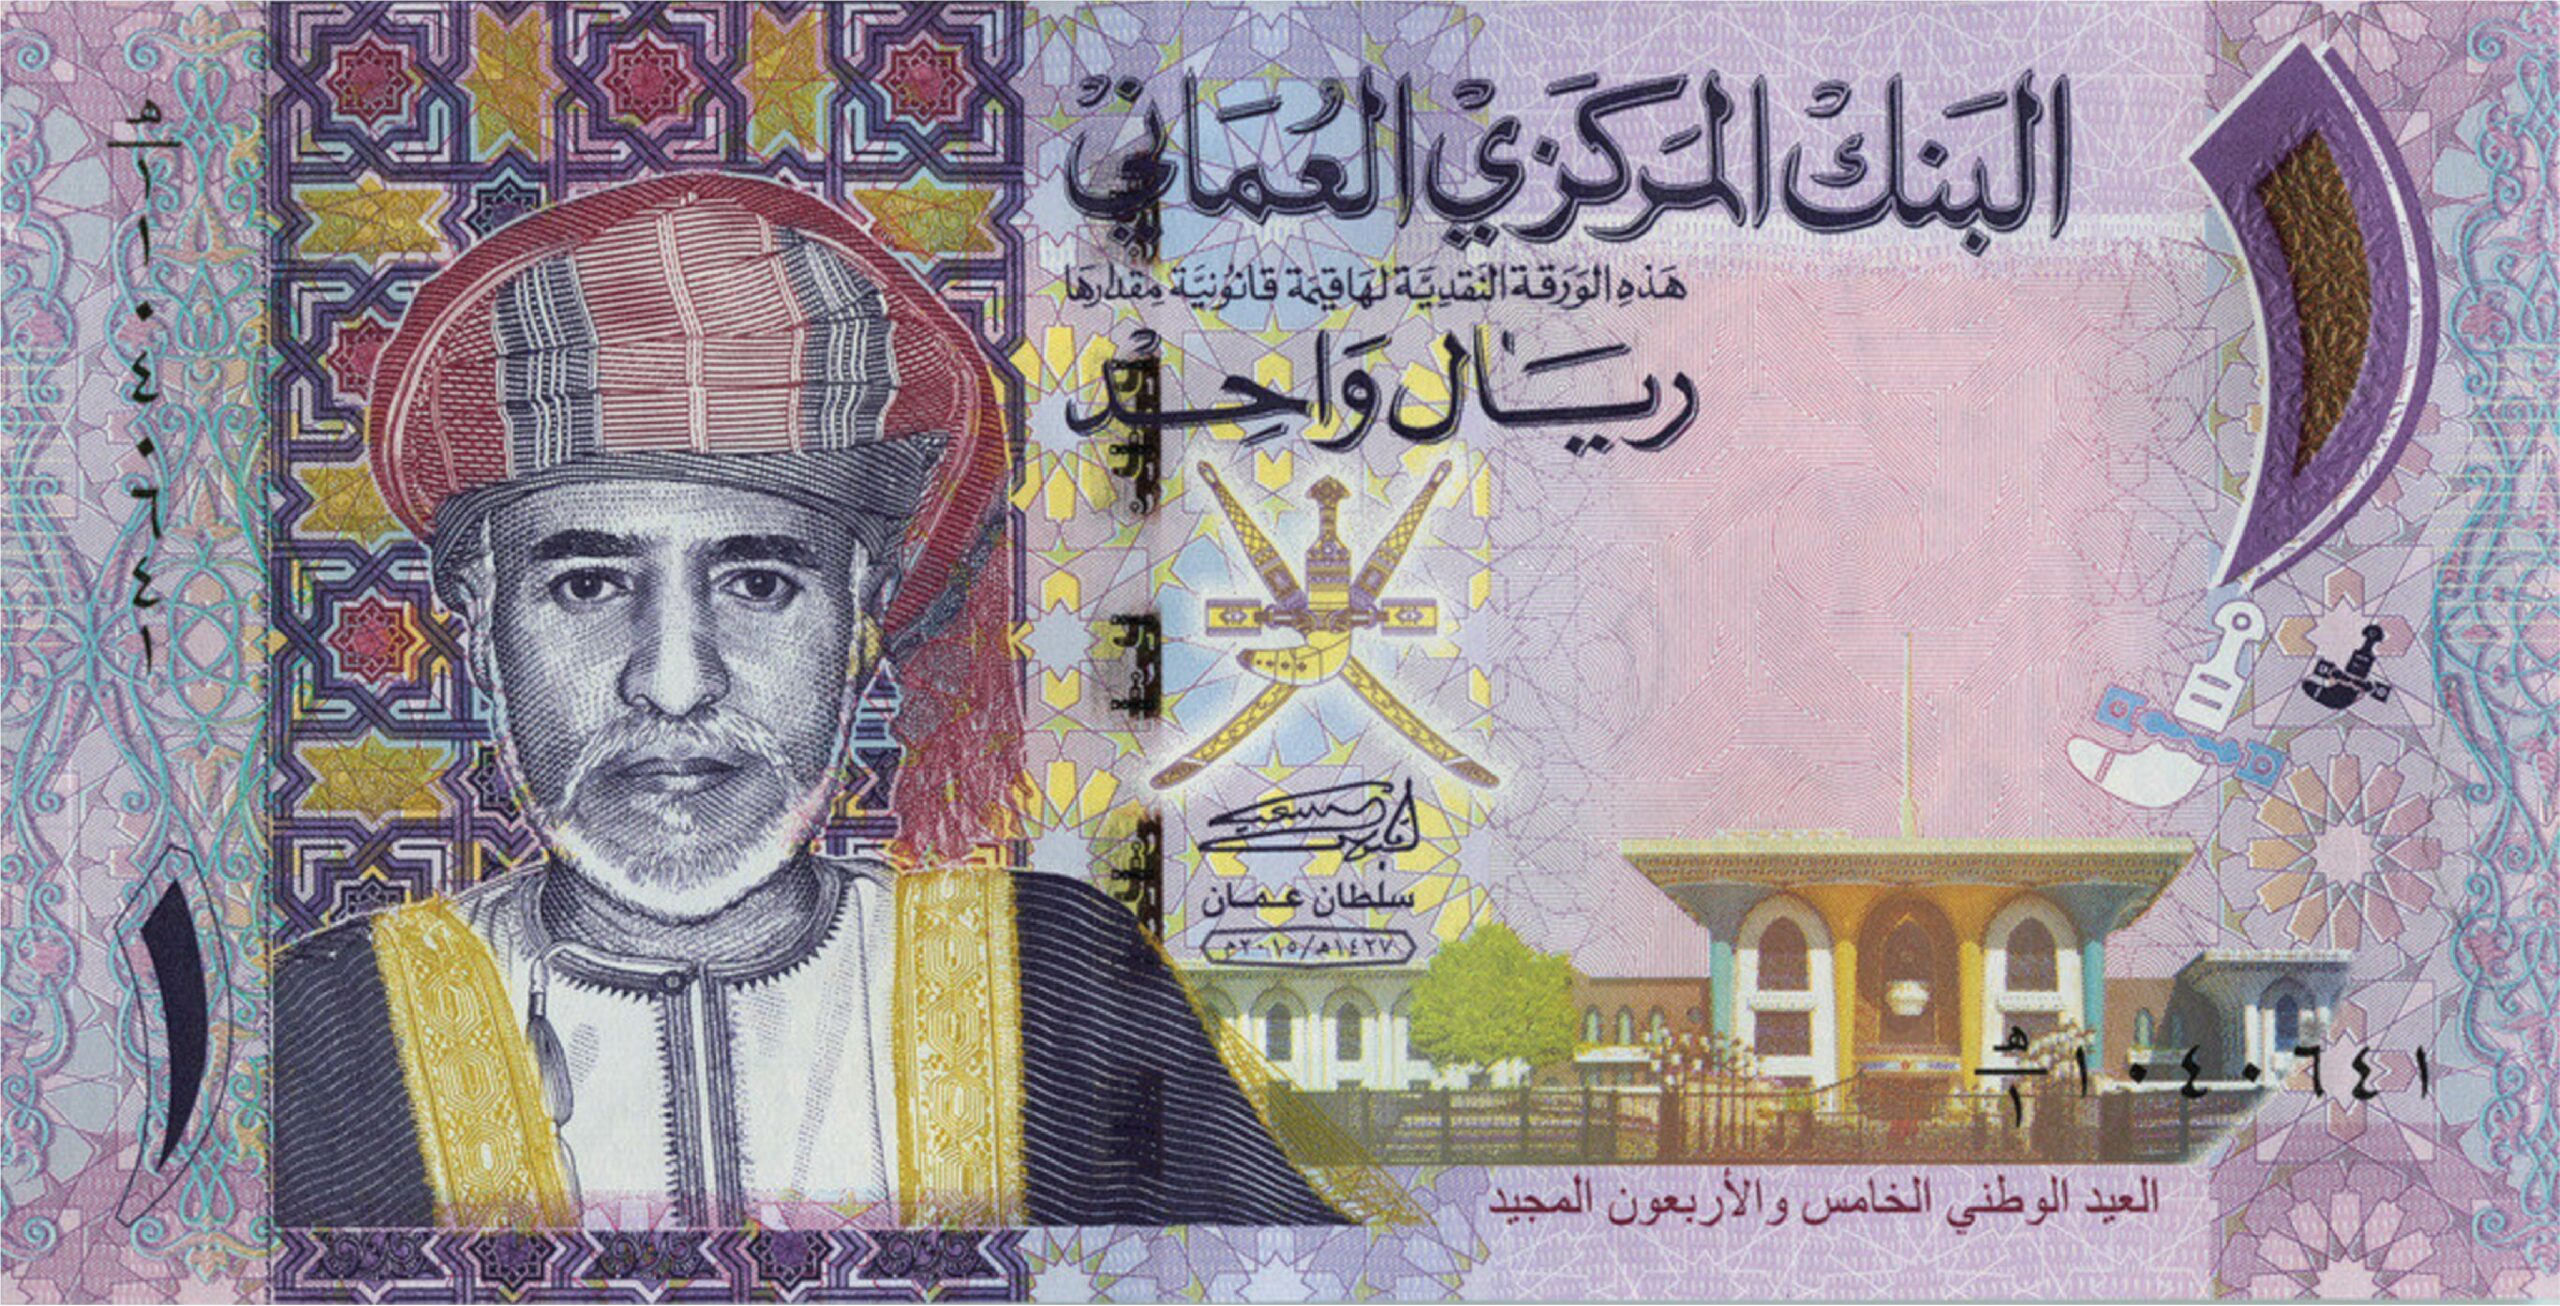 1 Omani Rial banknote (type 2015)